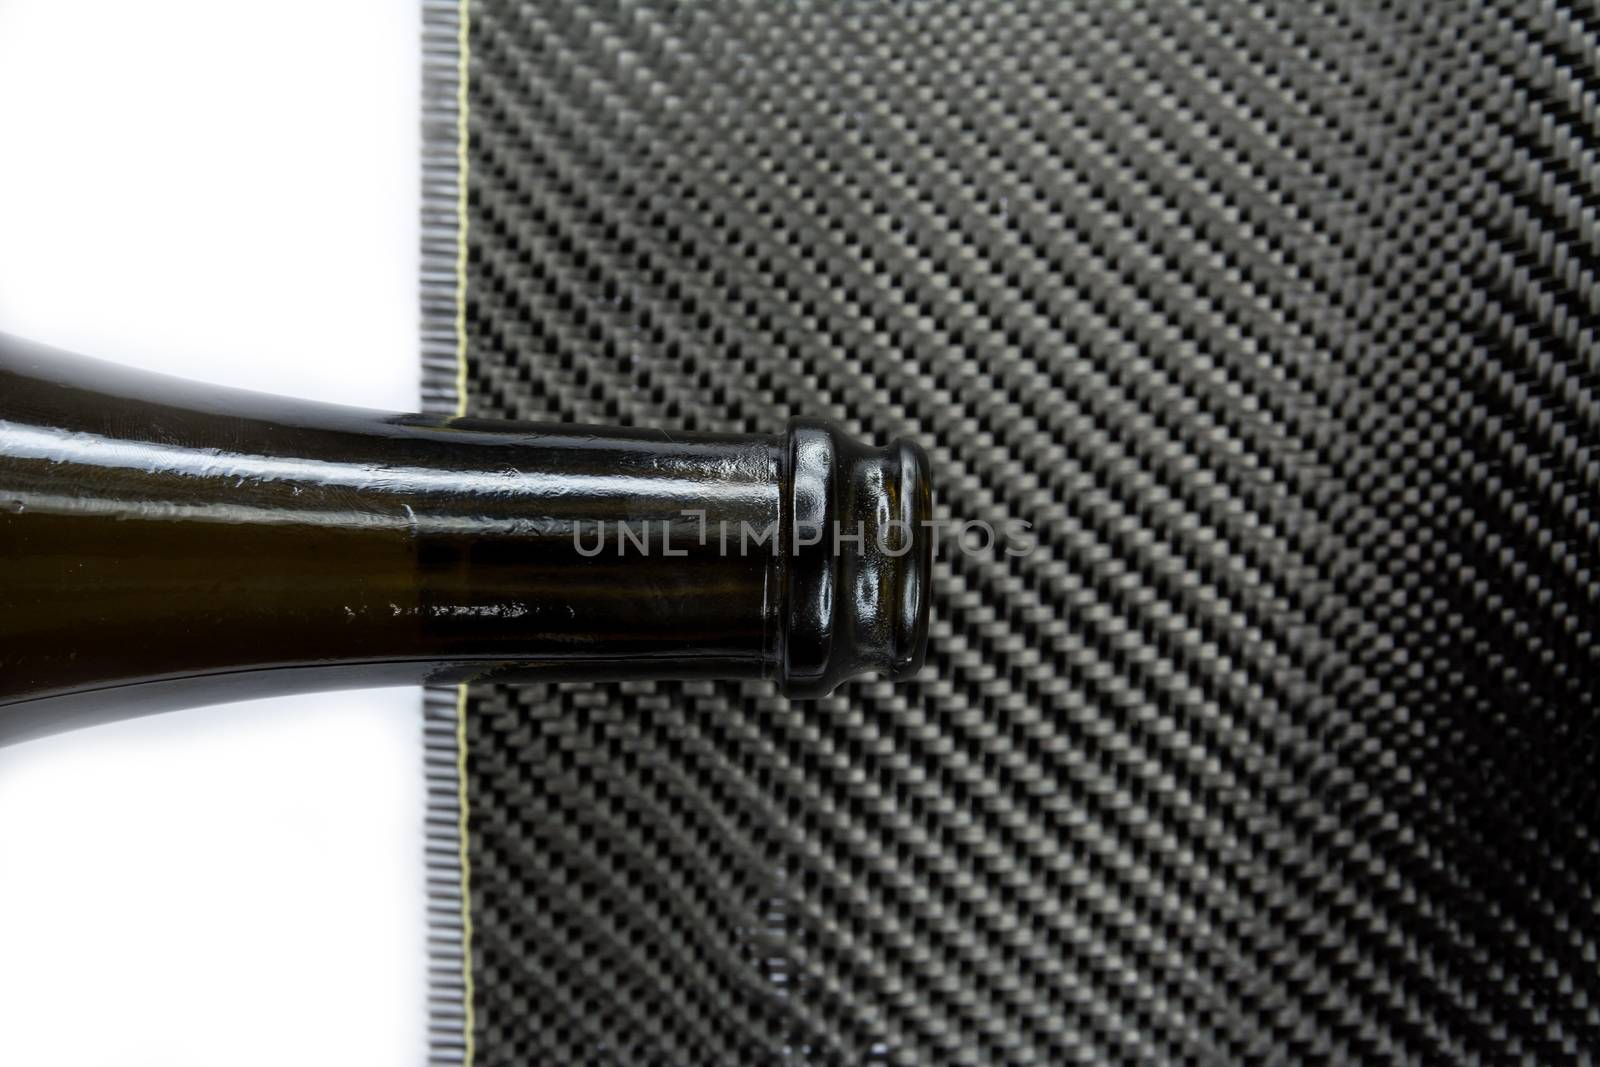 carbon fiber composite material product background by prakasitlalao